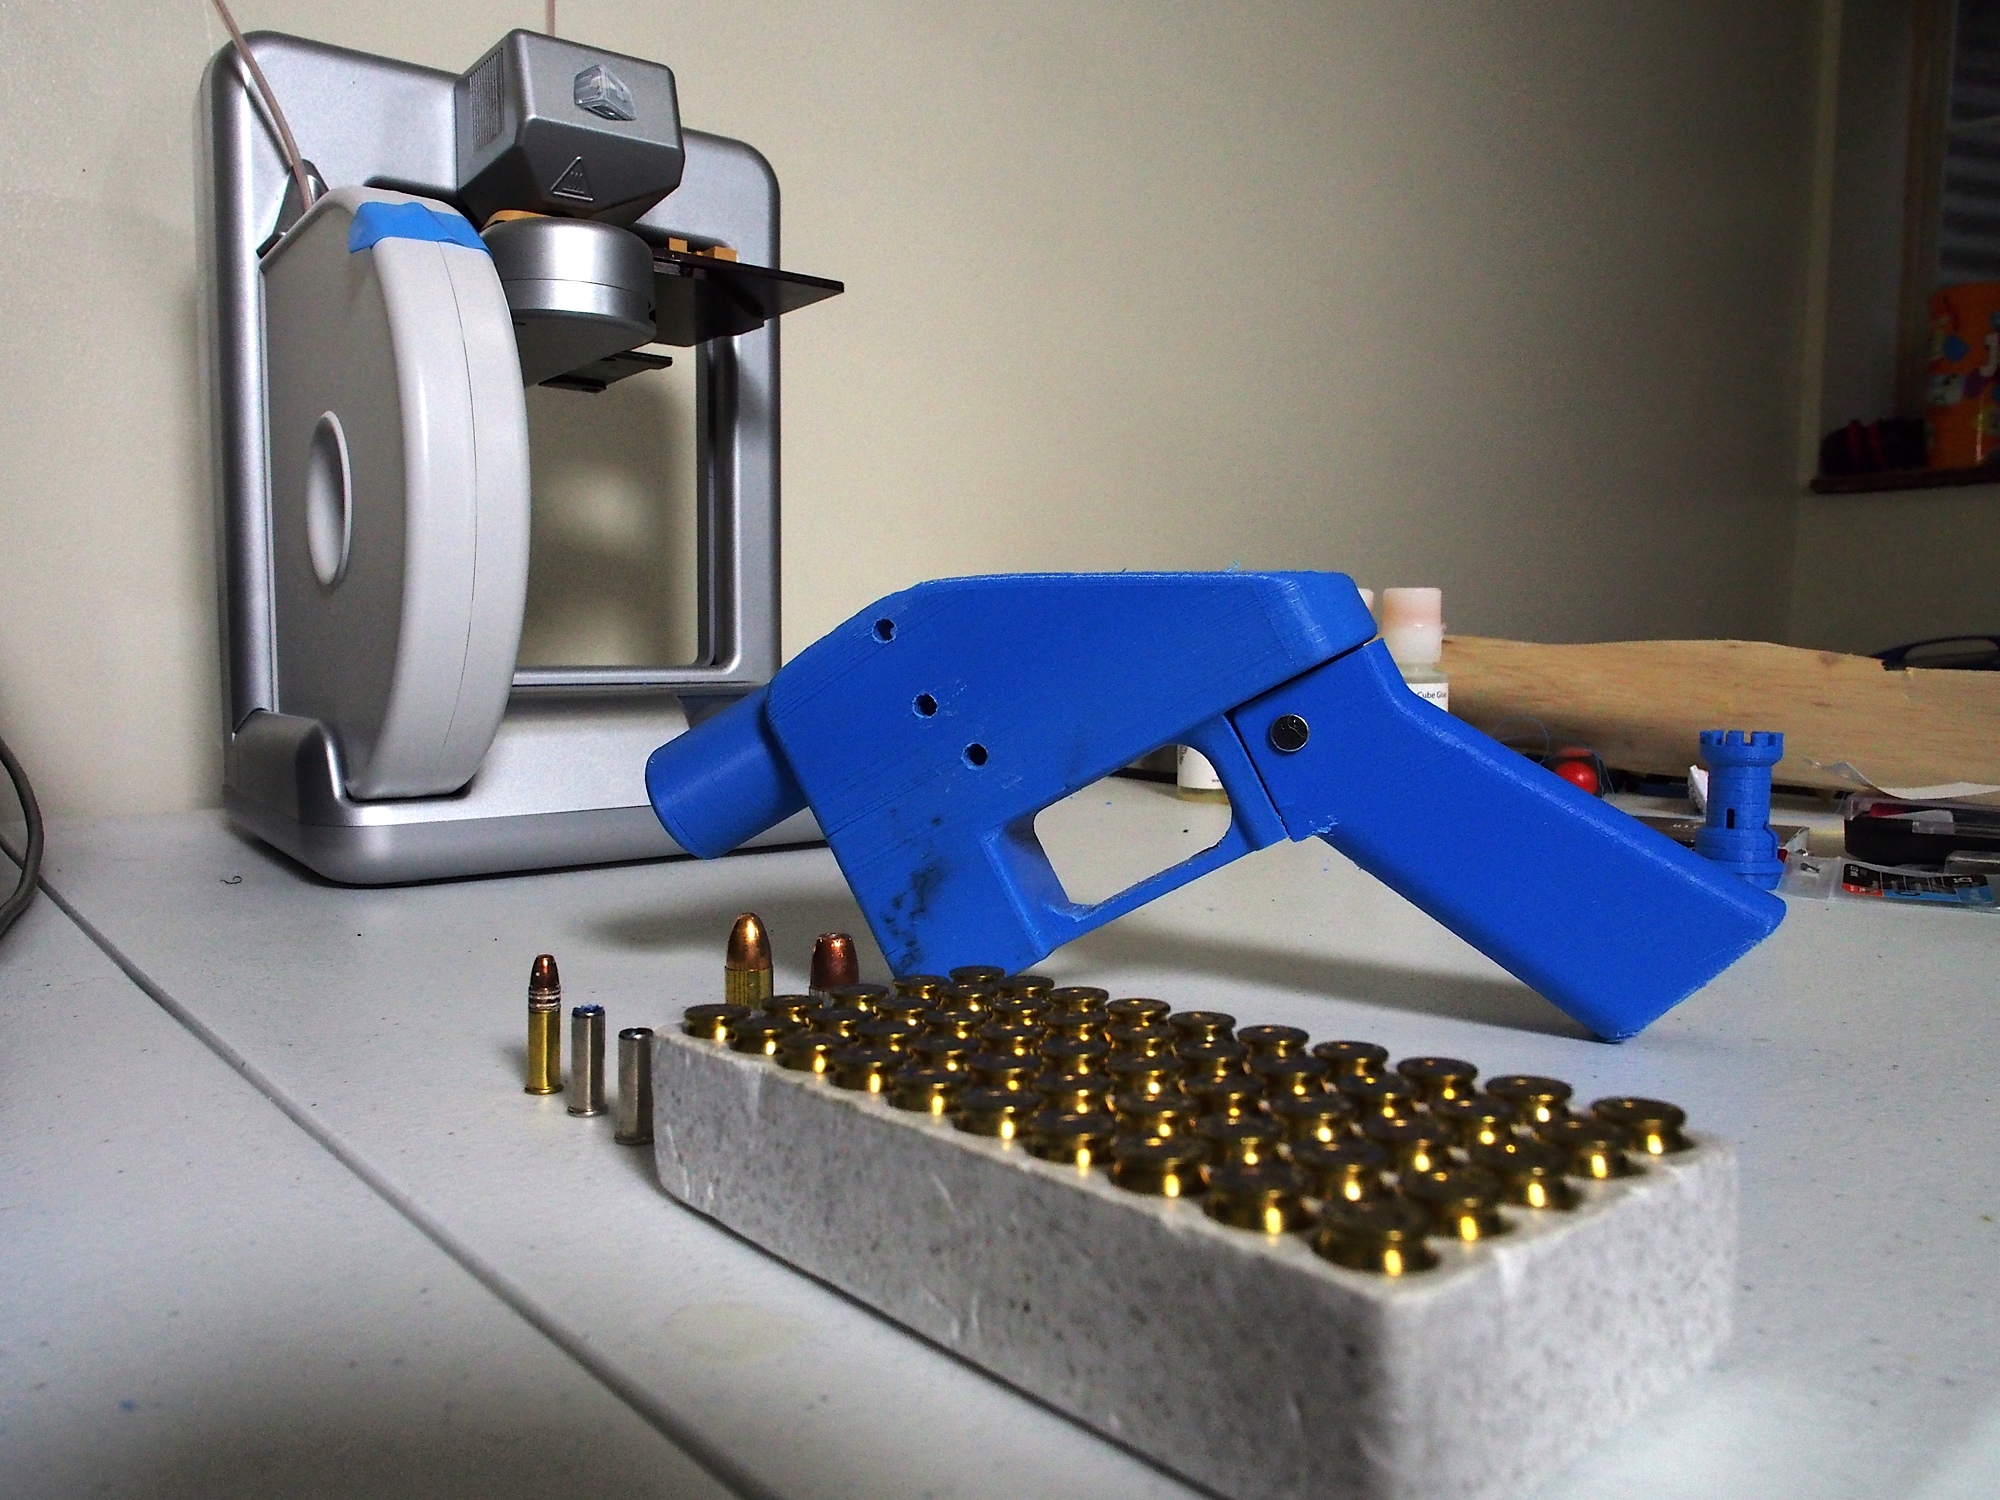 A Liberator pistol appears on July 11, 2013 next to the 3D printer on which its components were made. The single-shot handgun is the first firearm that can be made entirely with plastic components forged with a 3D printer and computer-aided design (CAD) files downloaded from the Internet. (Robert MacPherson/AFP/Getty Images)